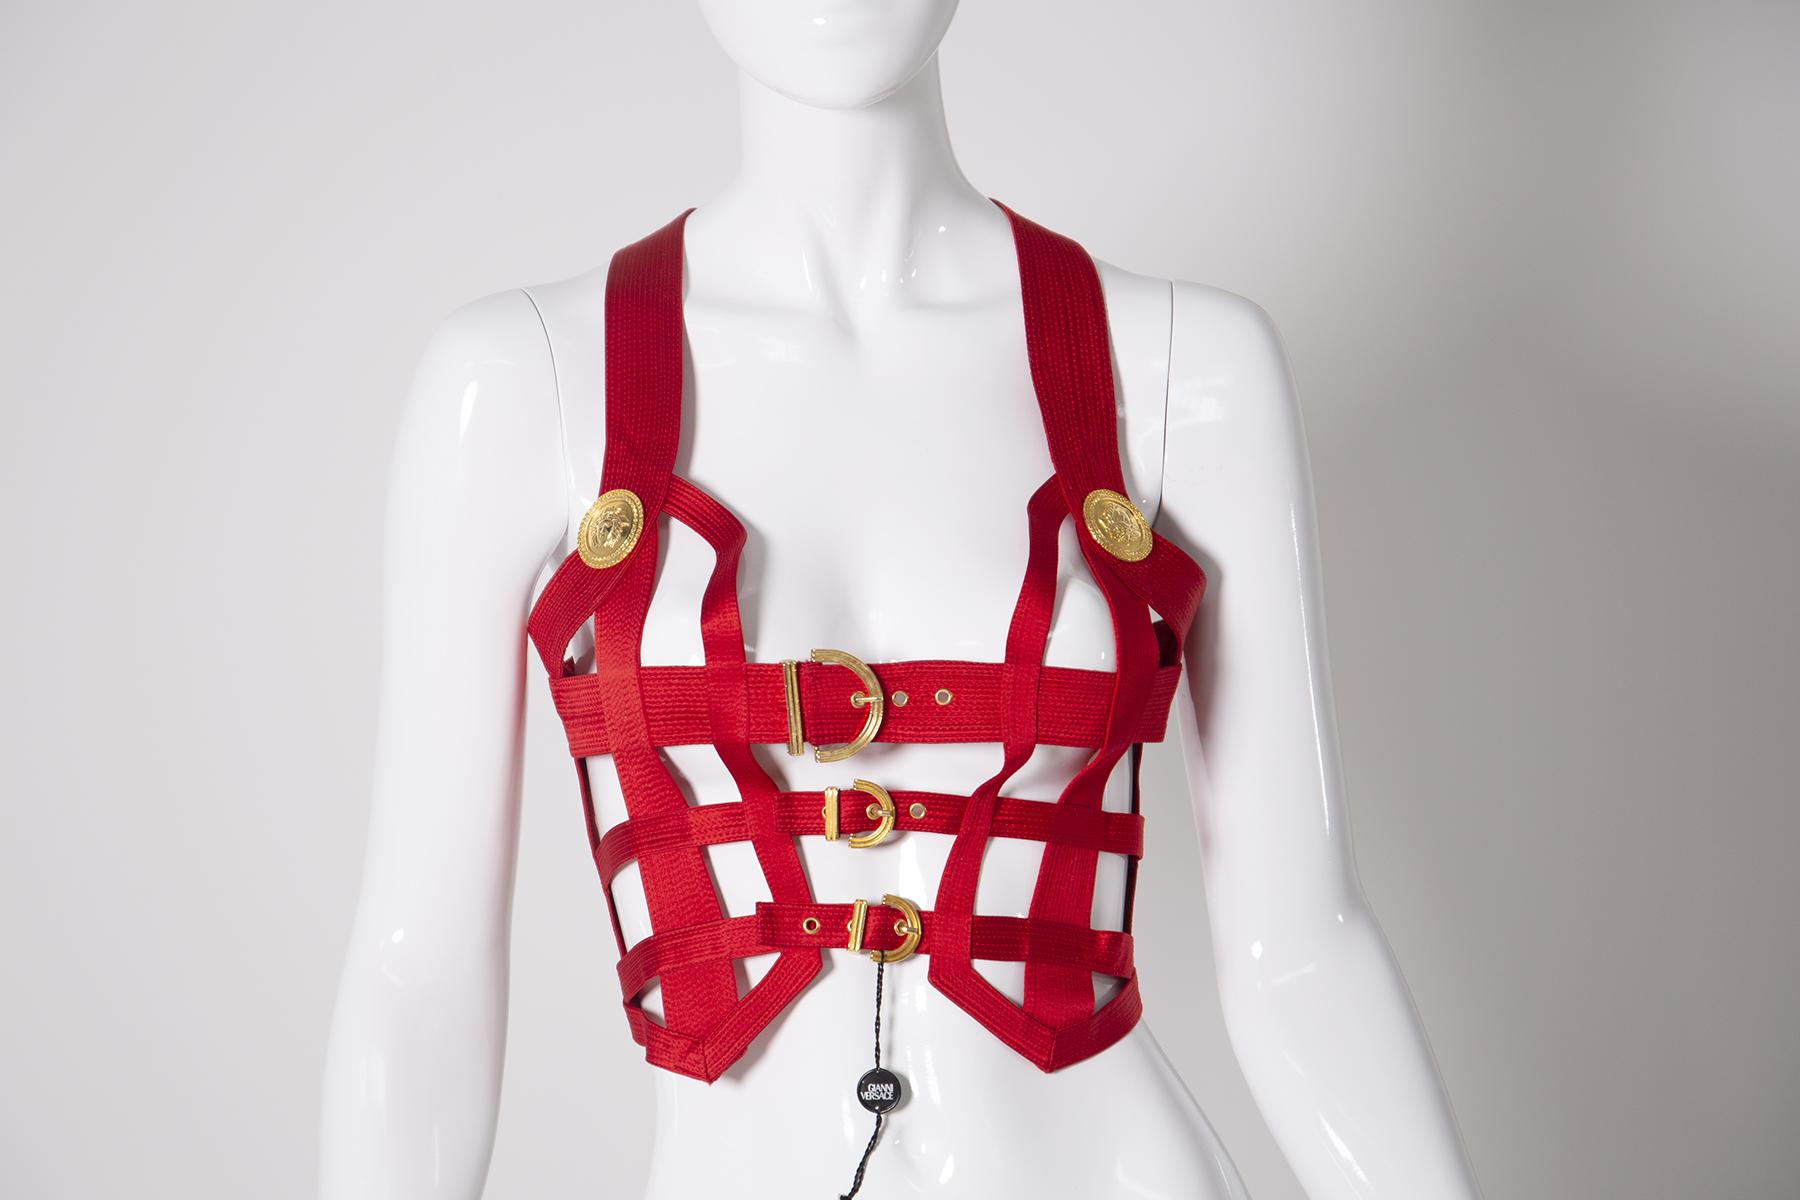 Amazing, iconic and very rare red silk stitched corset by Gianni Versace Couture with red silk bondage bodice with gold Medusa embossed trim. Labelled with an Italian size 42 that fits a US 2 or 4.Made in Italy. Its preciousness is given by the